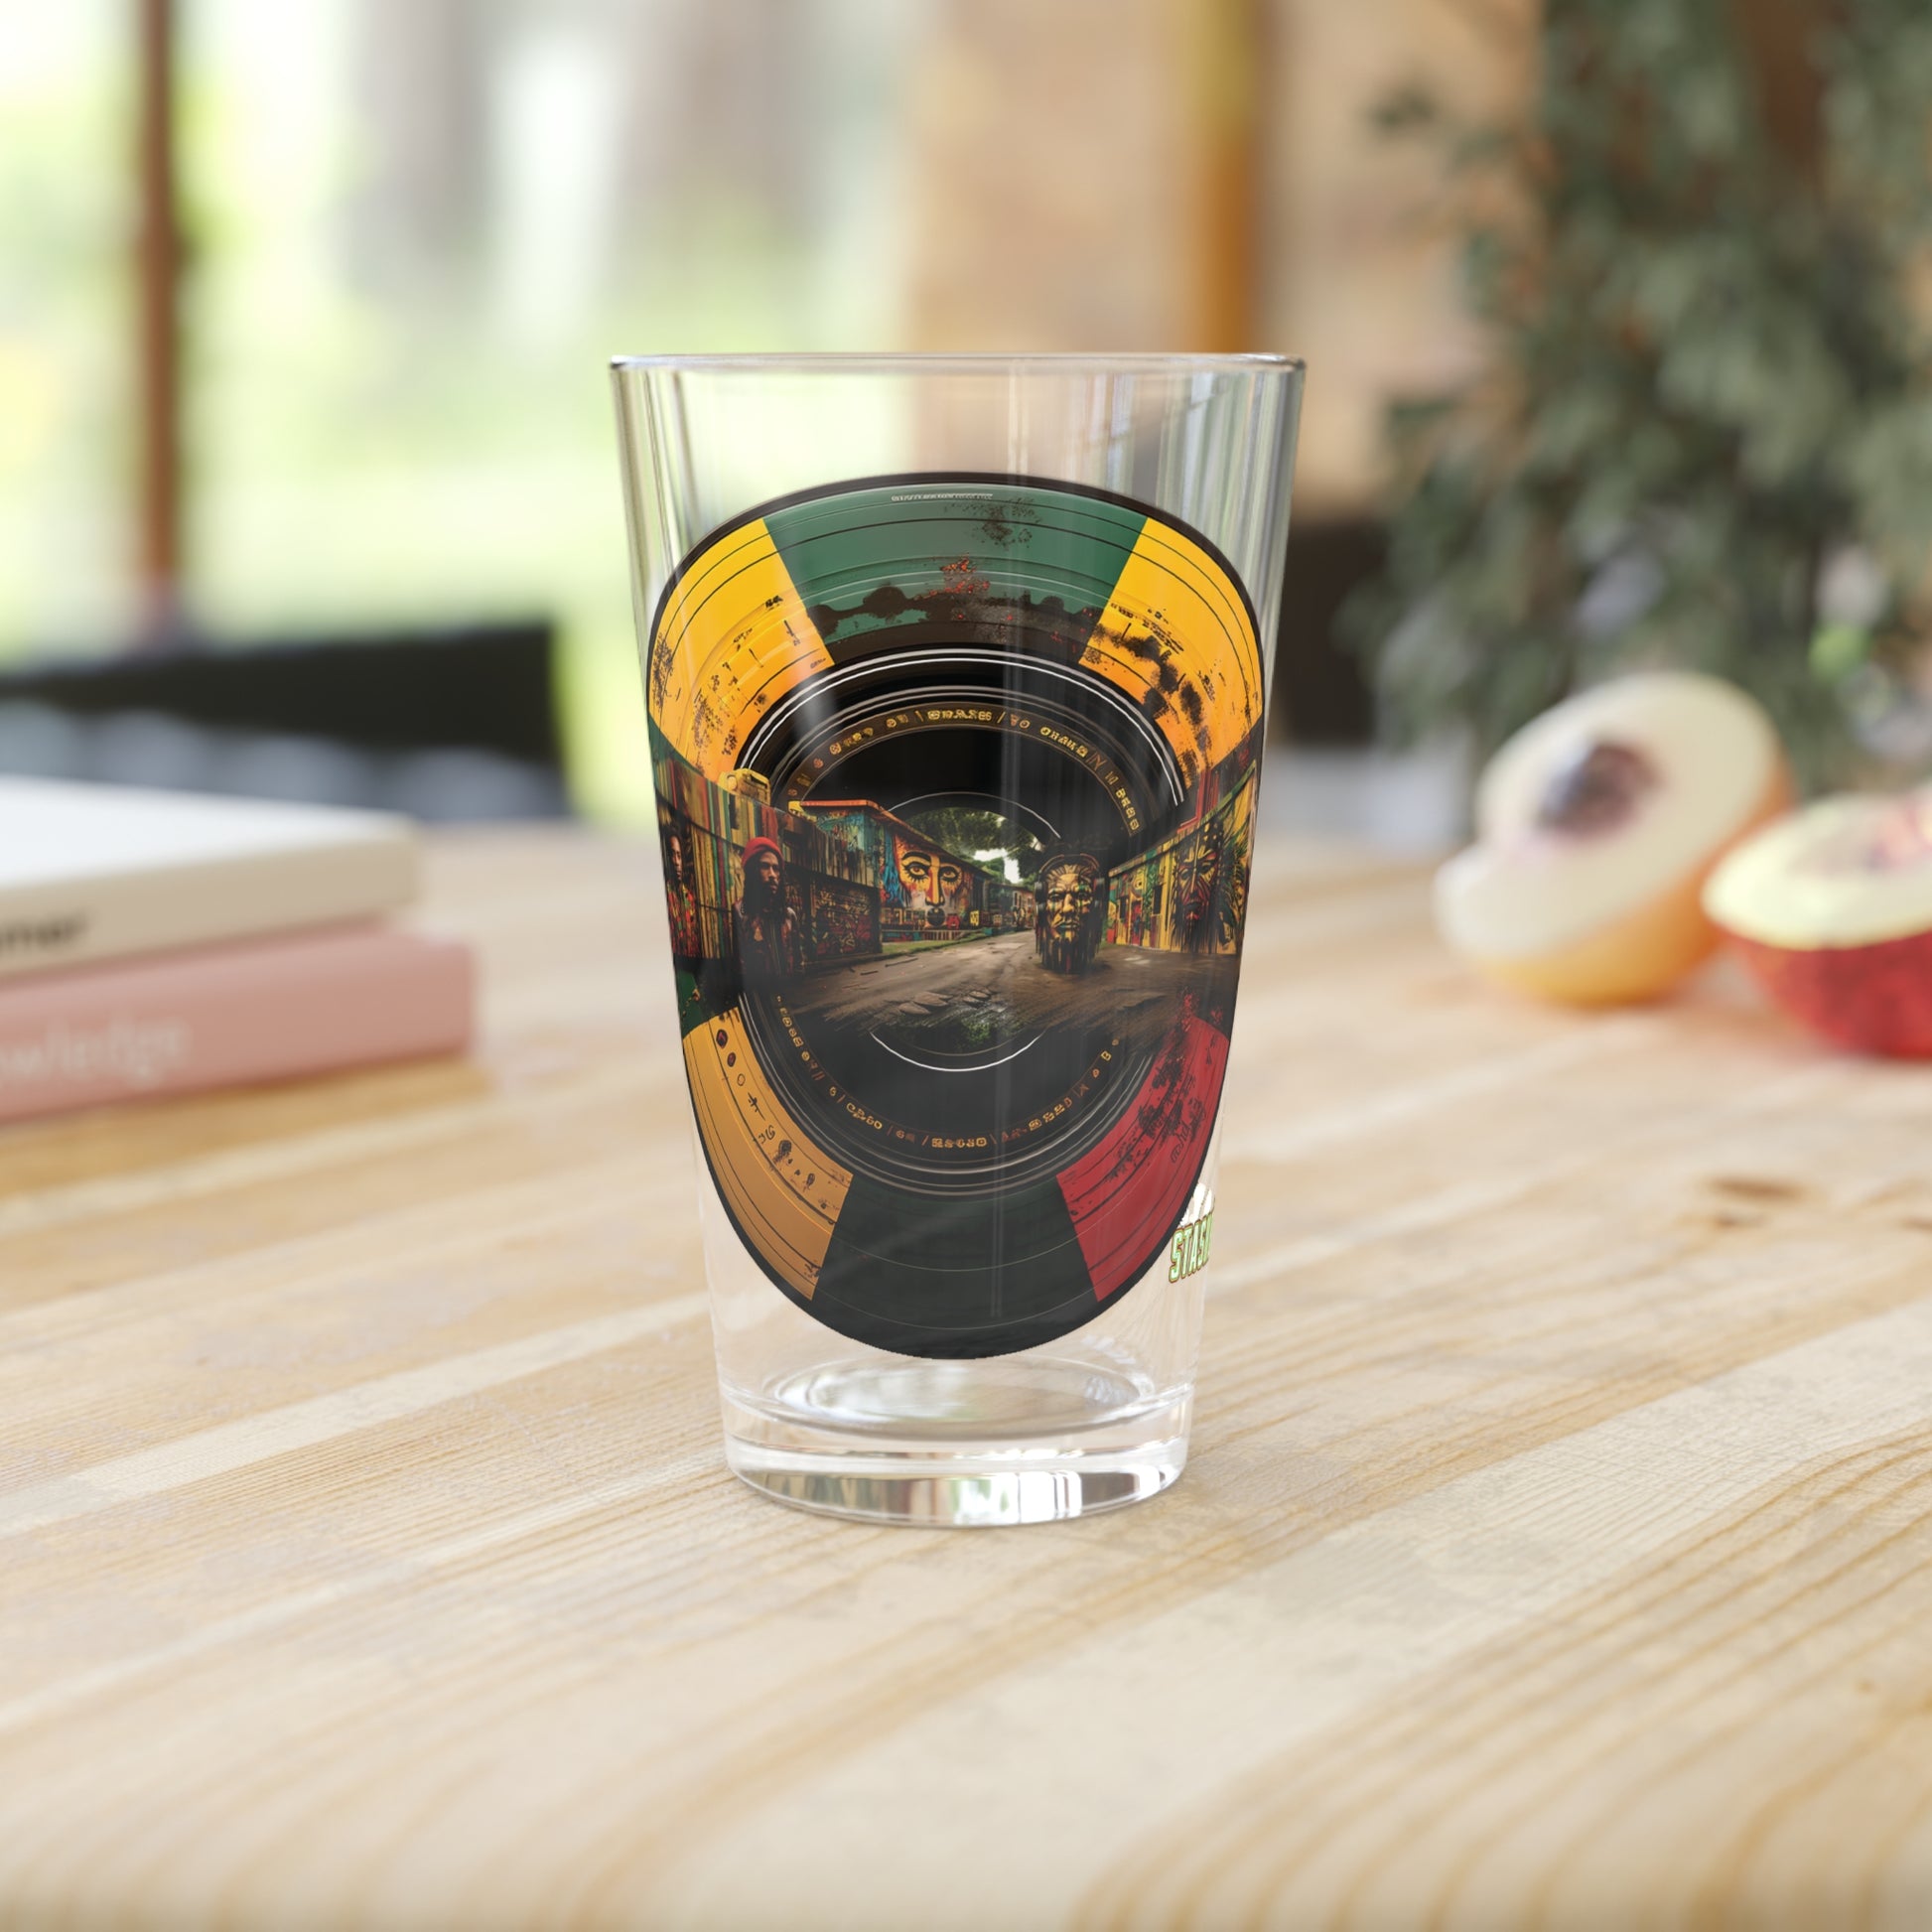 Sip the Rasta Rhythms: Psychedelic Design #005 Pint Glass. Musical elegance, exclusively at Stashbox.ai.